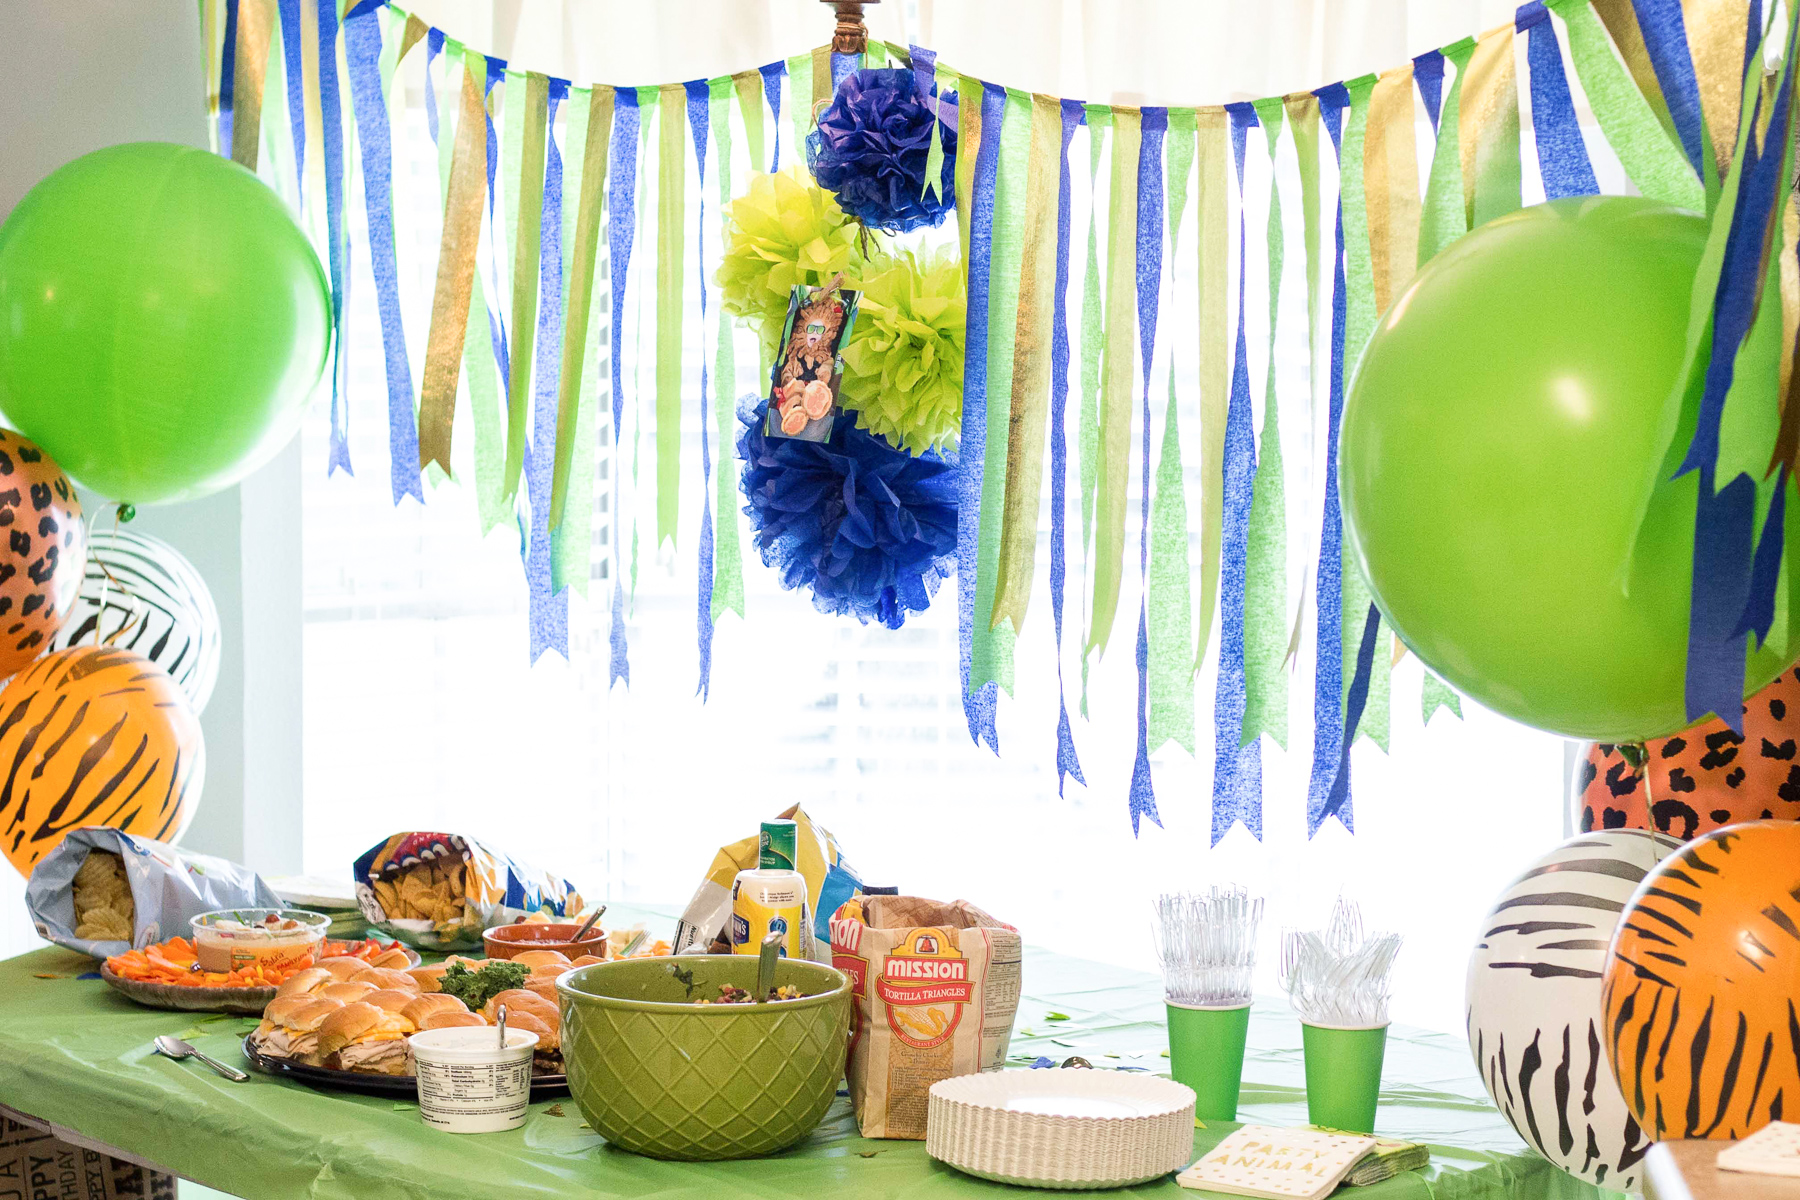 Wild One 1st birthday food ideas and party decorations, streamers, Alyssa Ashmore of Passionate Portions